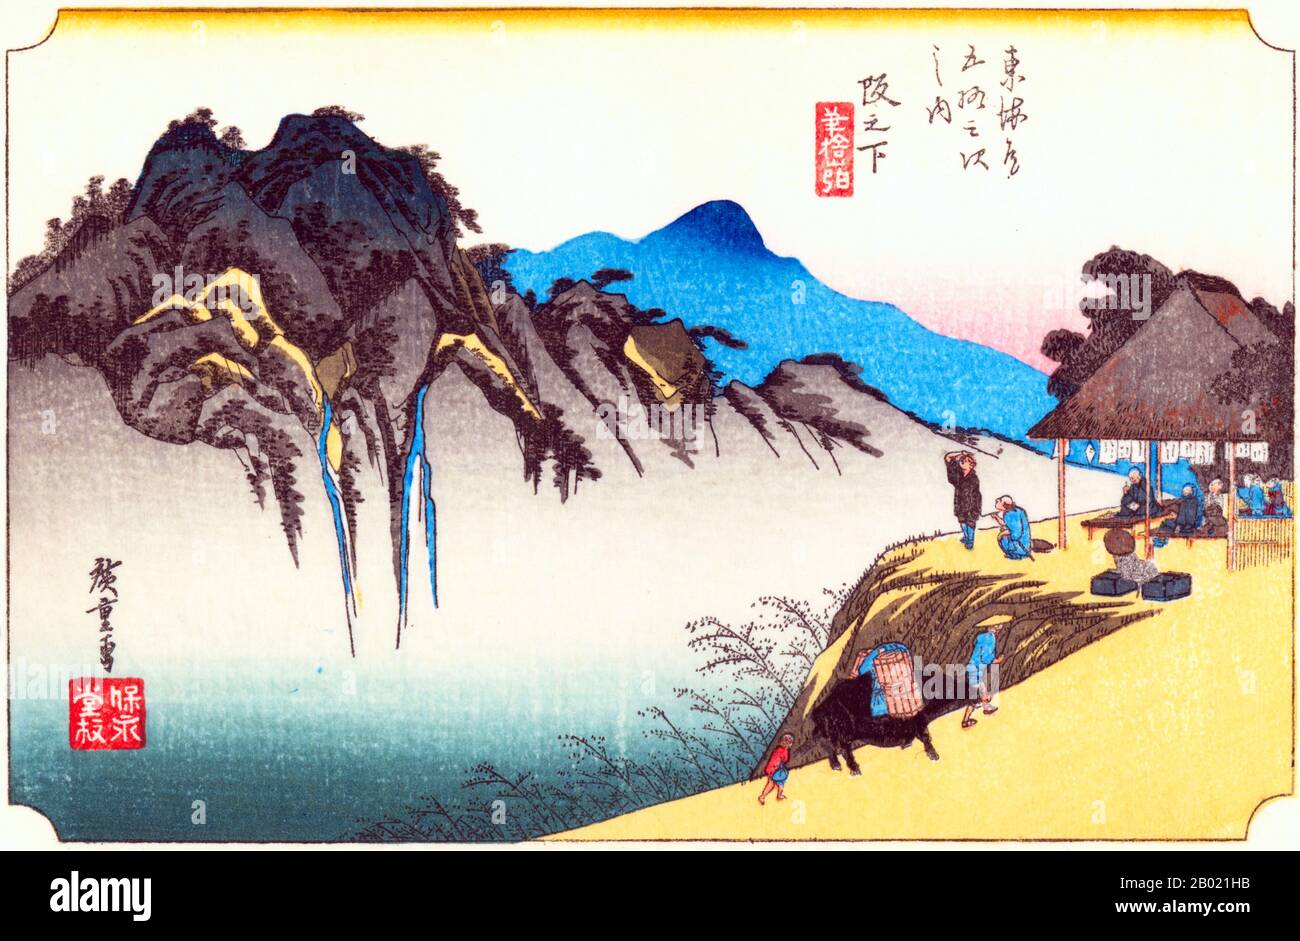 Sakanoshita: Travellers resting at an open teahouse, looking across a ravine to the rocky heights opposite; blue hills beyond, in colour blocks only.  In olden times, the beauty of the rugged mountain ranges in this area attracted many visitors from Kyoto. Travellers enjoyed the spectacular view of the mountain from a teahouse located on the mountain pass.  Utagawa Hiroshige (歌川 広重, 1797 – October 12, 1858) was a Japanese ukiyo-e artist, and one of the last great artists in that tradition. He was also referred to as Andō Hiroshige (安藤 広重) (an irregular combination of family name and art name) Stock Photo